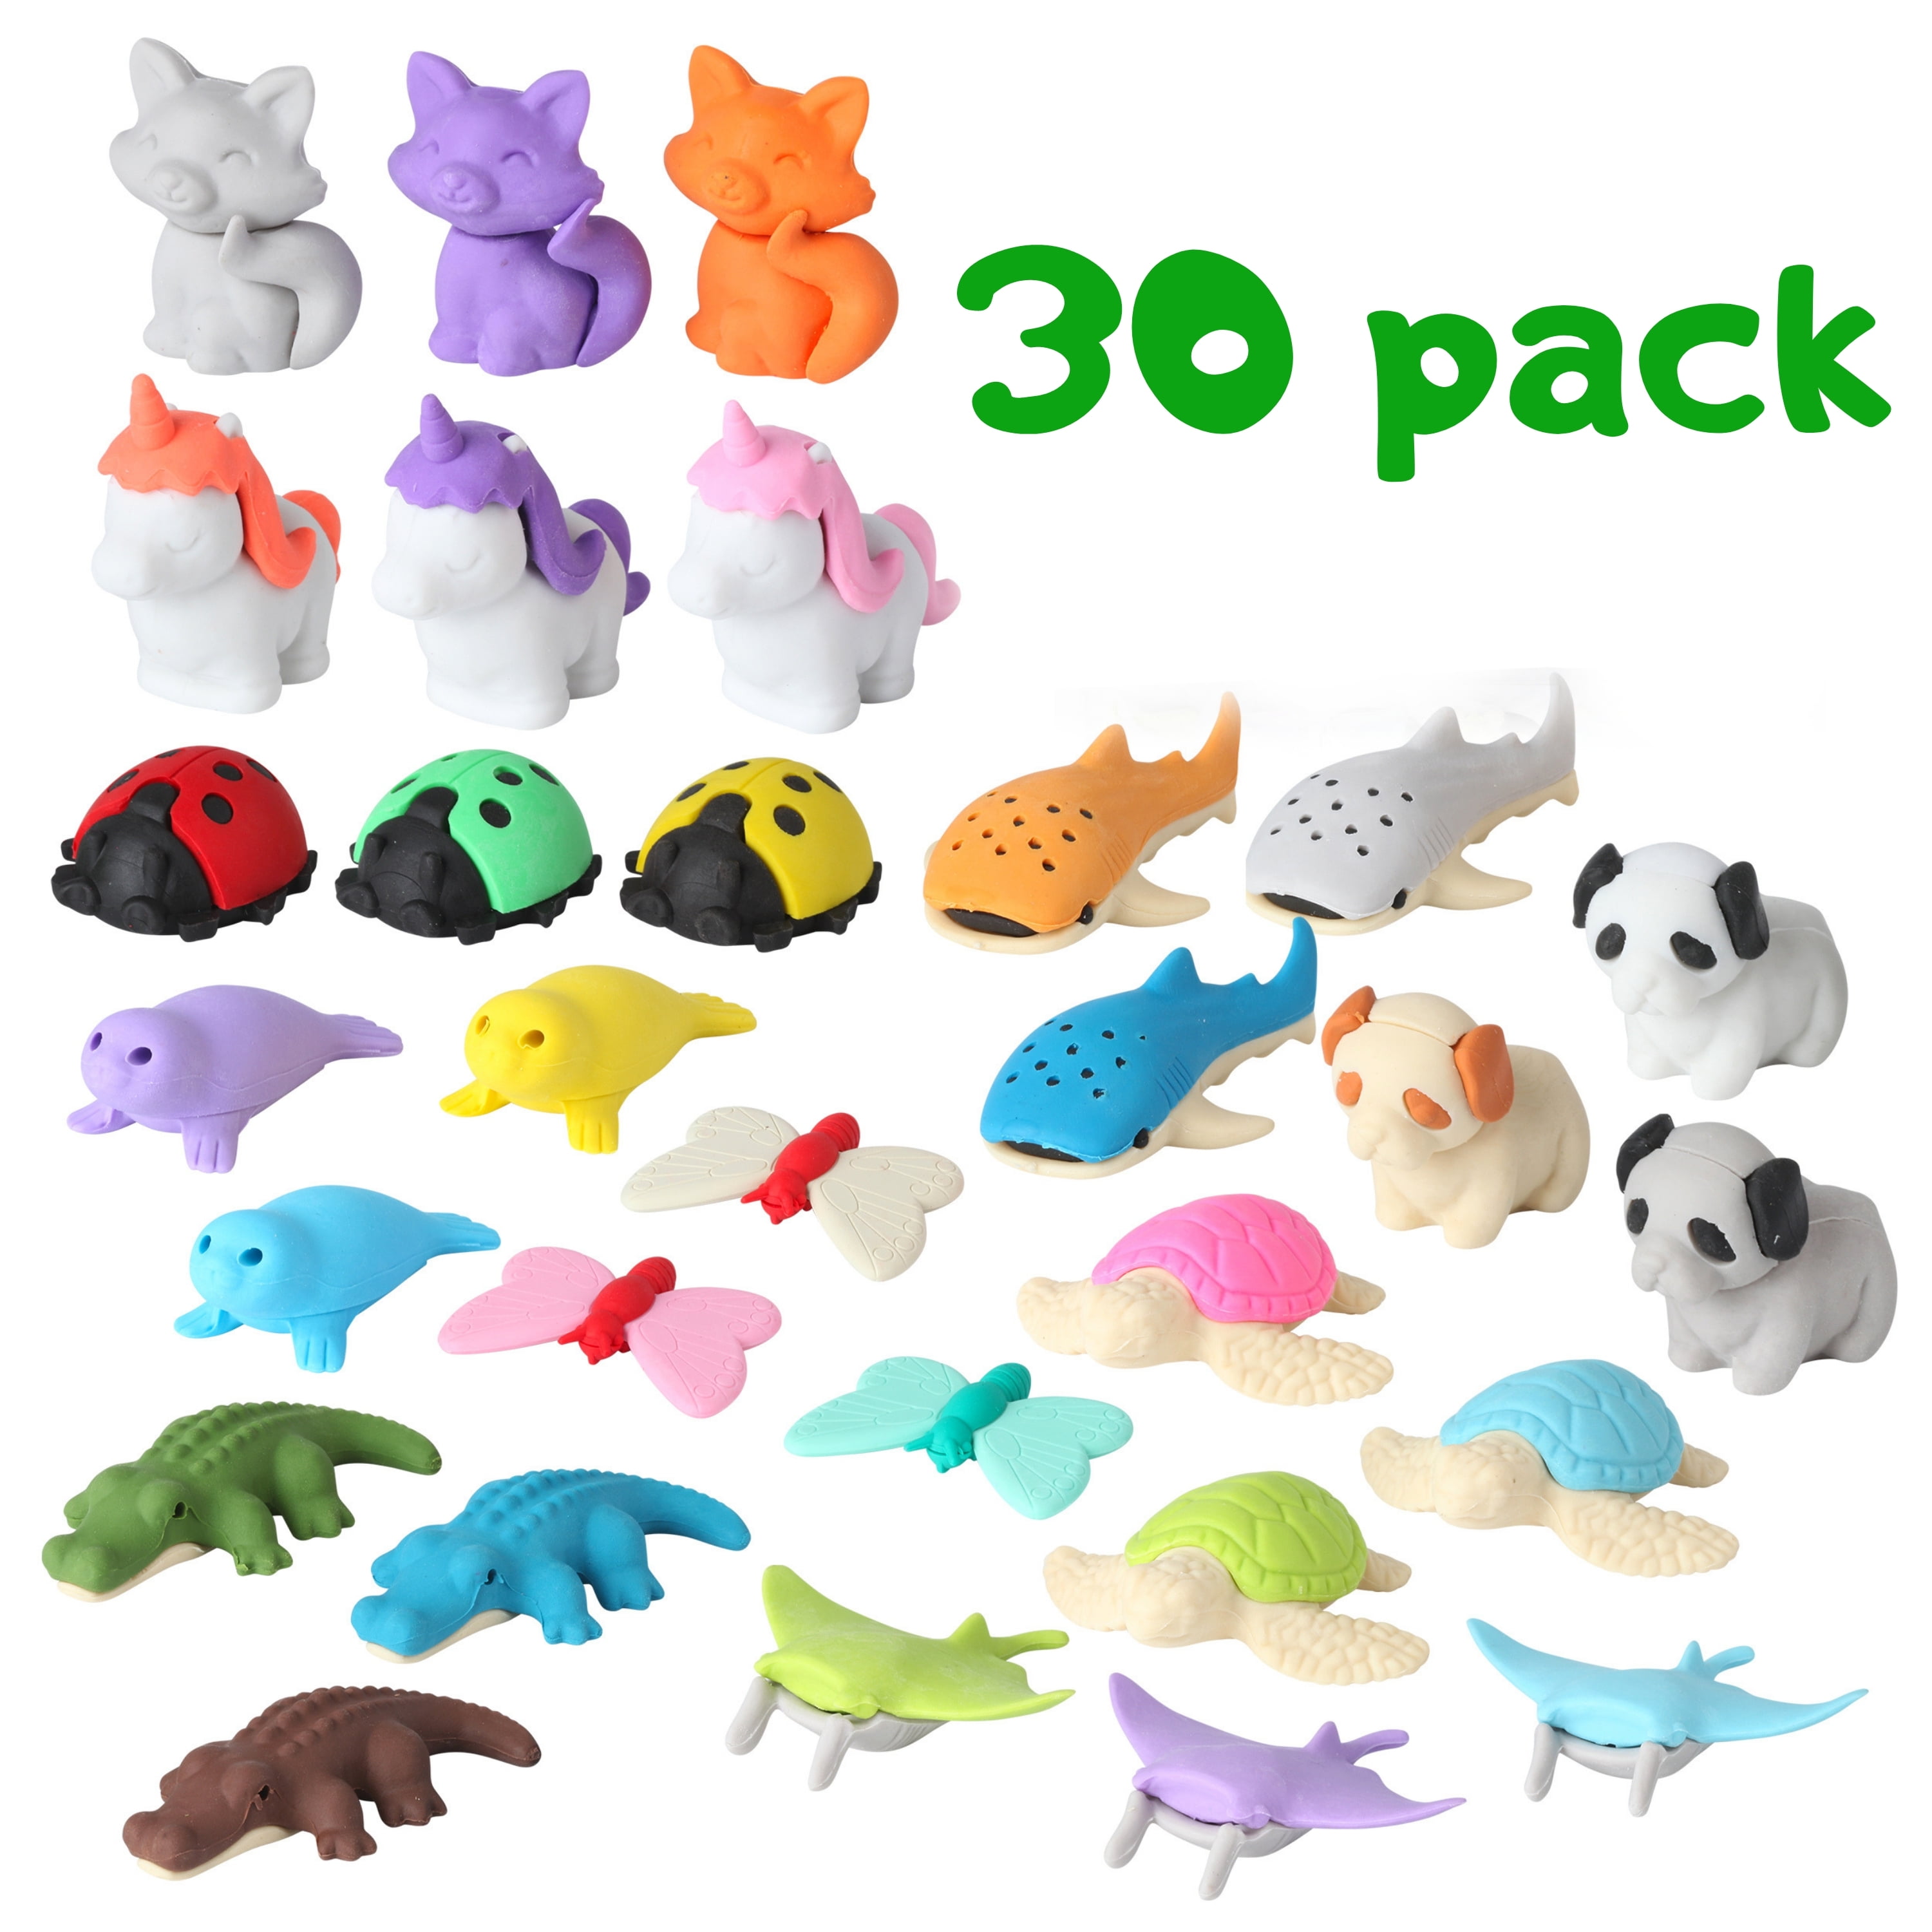 Novelty Cute 3D Turtle Erasers Pencils Rubbers Party Bag Filler Accessories Toy 